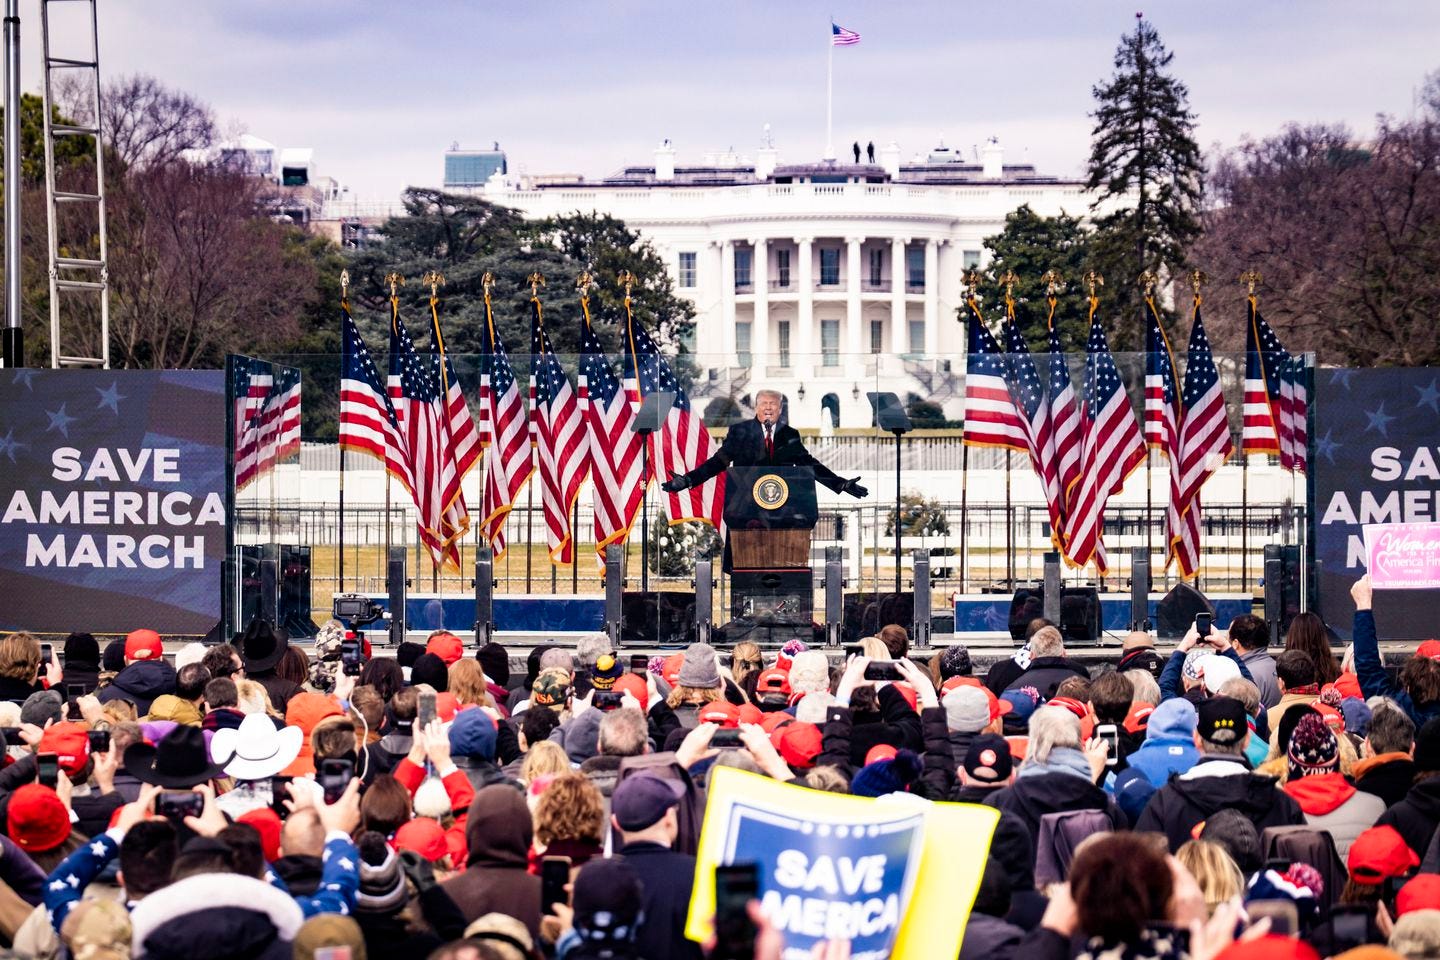 Then President Donald Trump spoke at a rally with the White House in the background, in Washington on Jan. 6, 2021. Lawyers for former President Trump on Thursday asked the Supreme Court to block the release of White House records concerning the Jan. 6 attack on the Capitol, arguing that he had a constitutional right to shield the materials from Congress even though President Biden declined to invoke executive privilege over them.